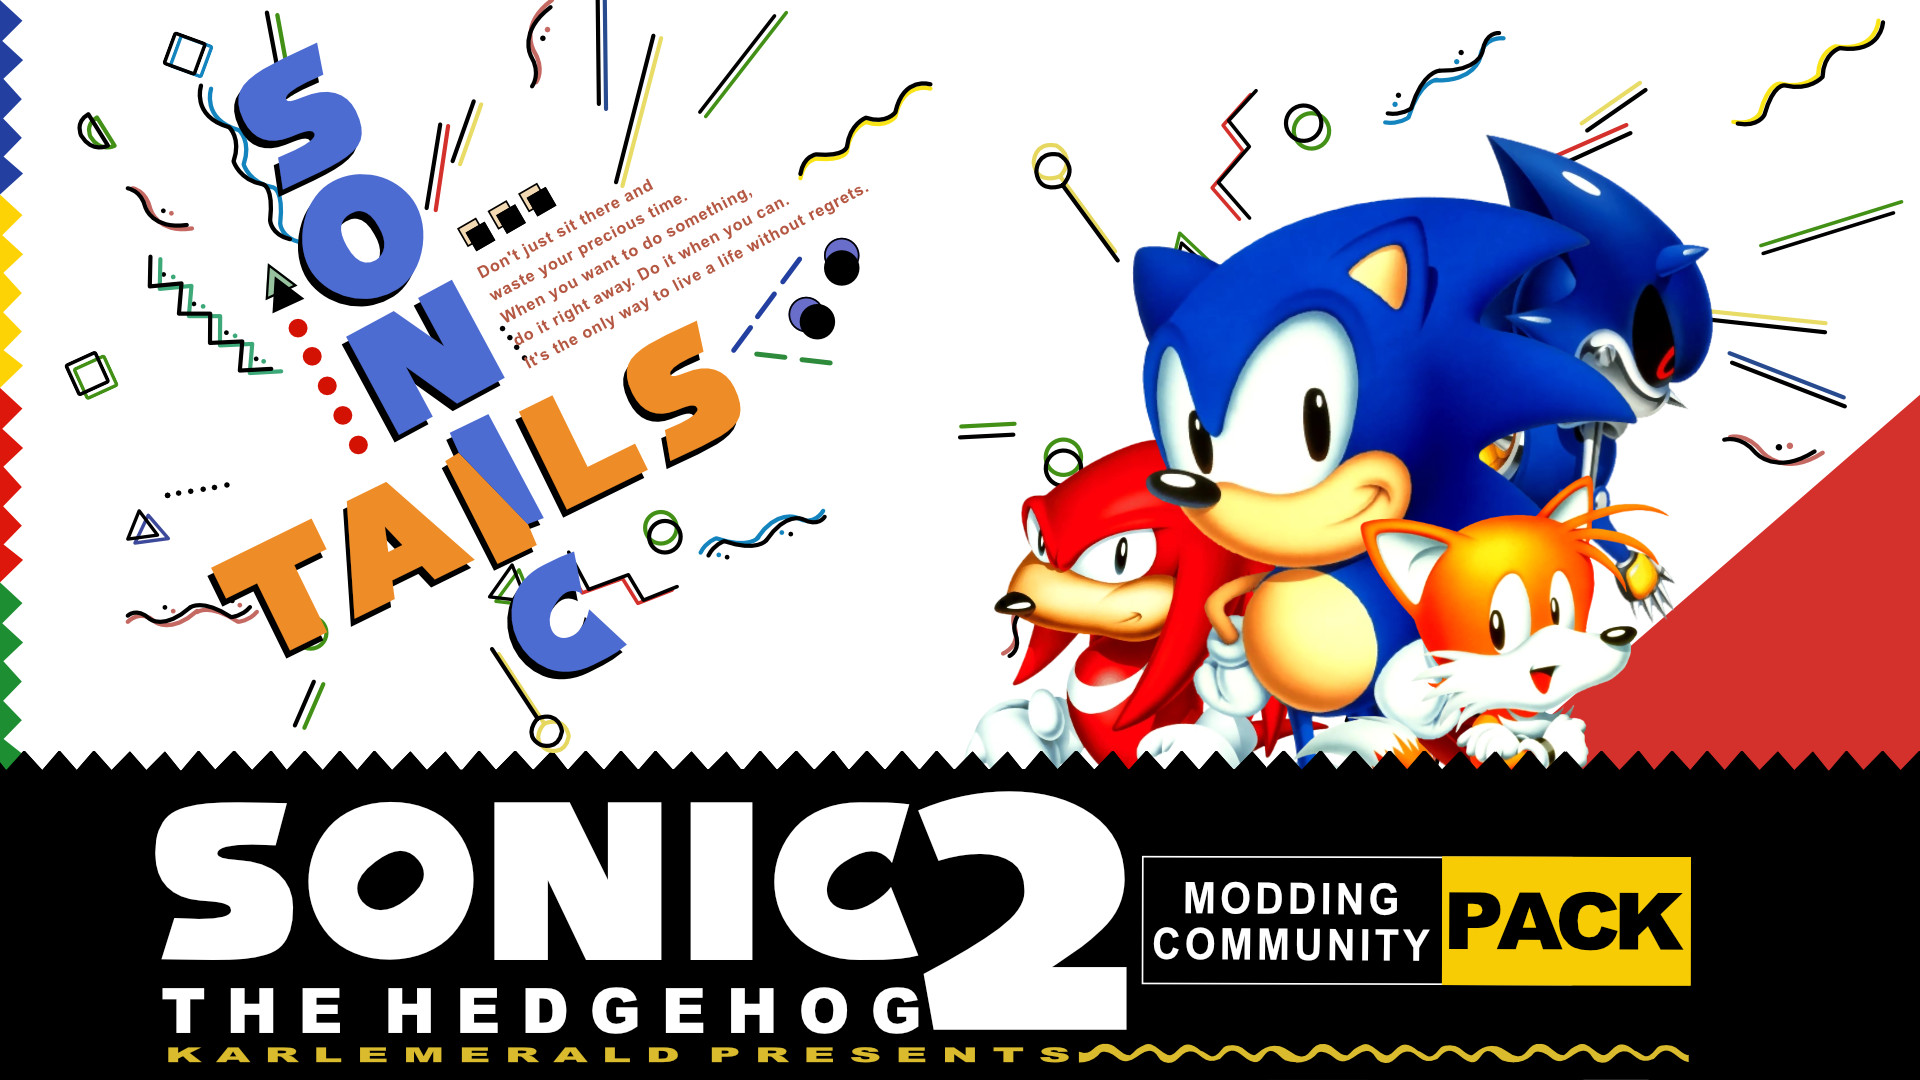 Sonic 2 Absolute The Modding Community Pack [Sonic The Hedgehog 2